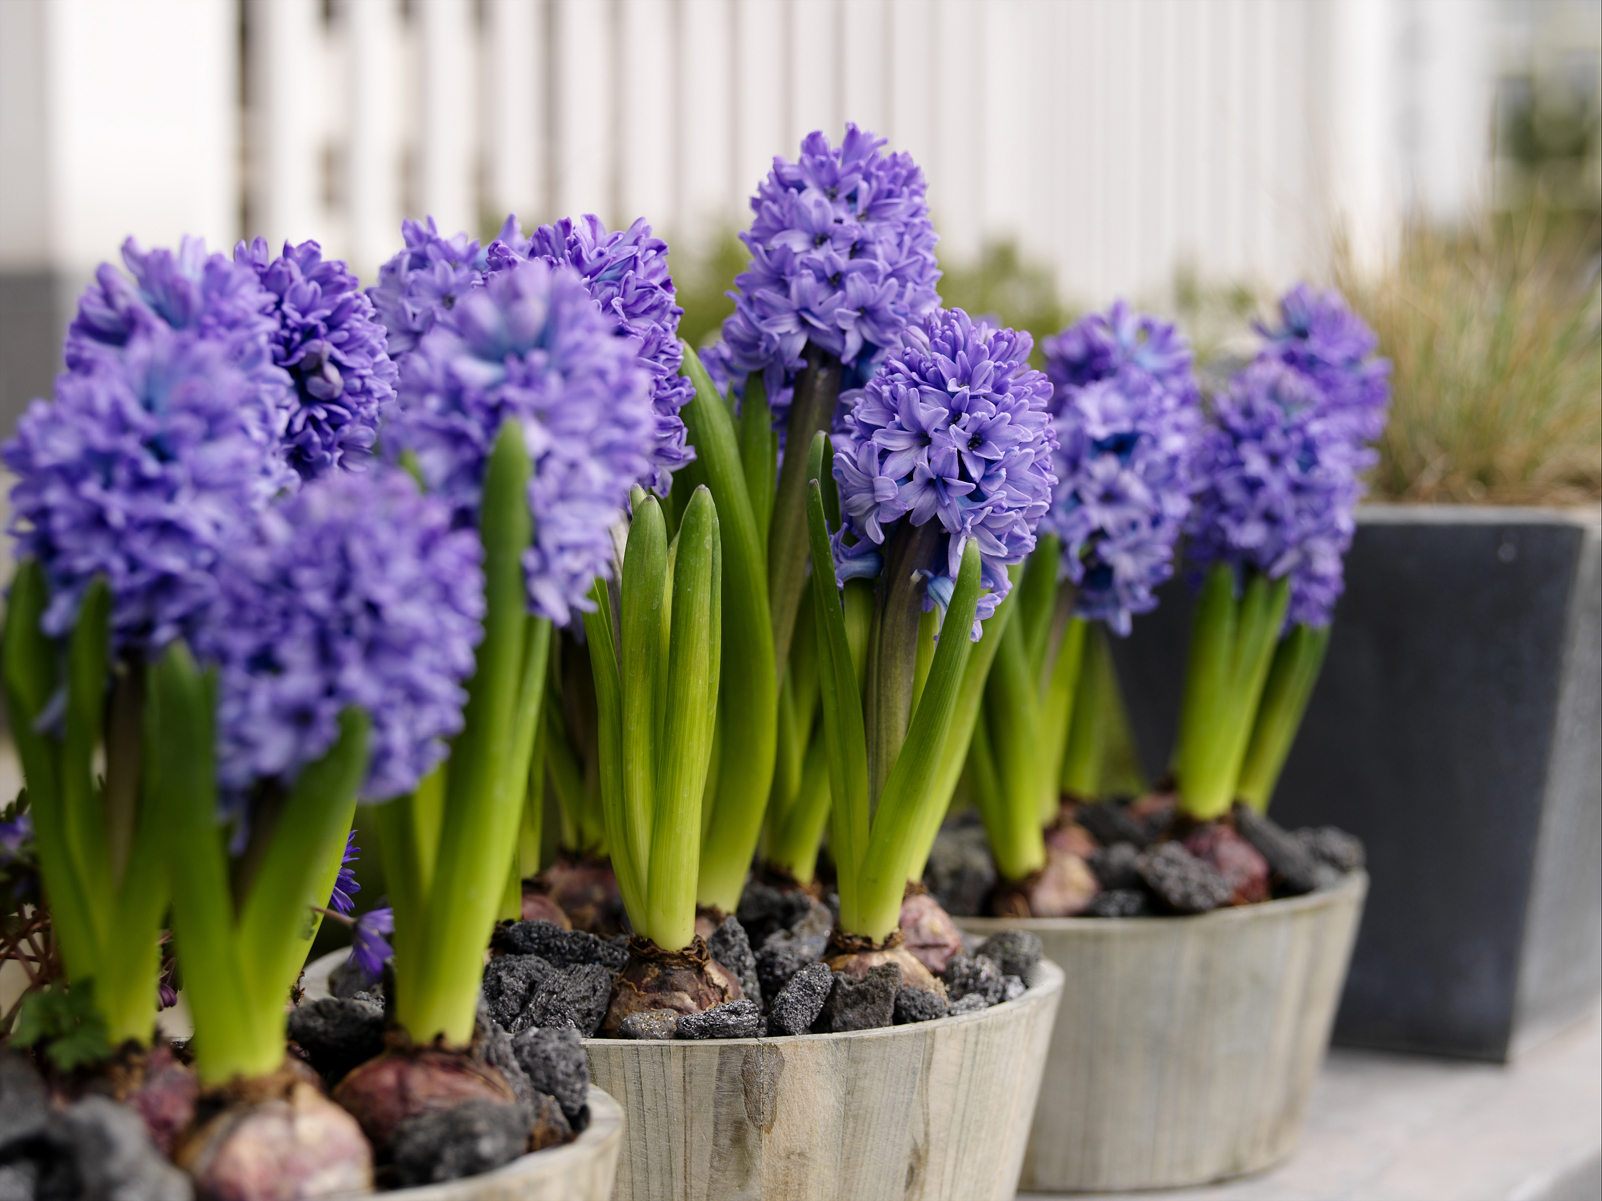 Hyacinth flowers at home wallpapers and images - wallpapers